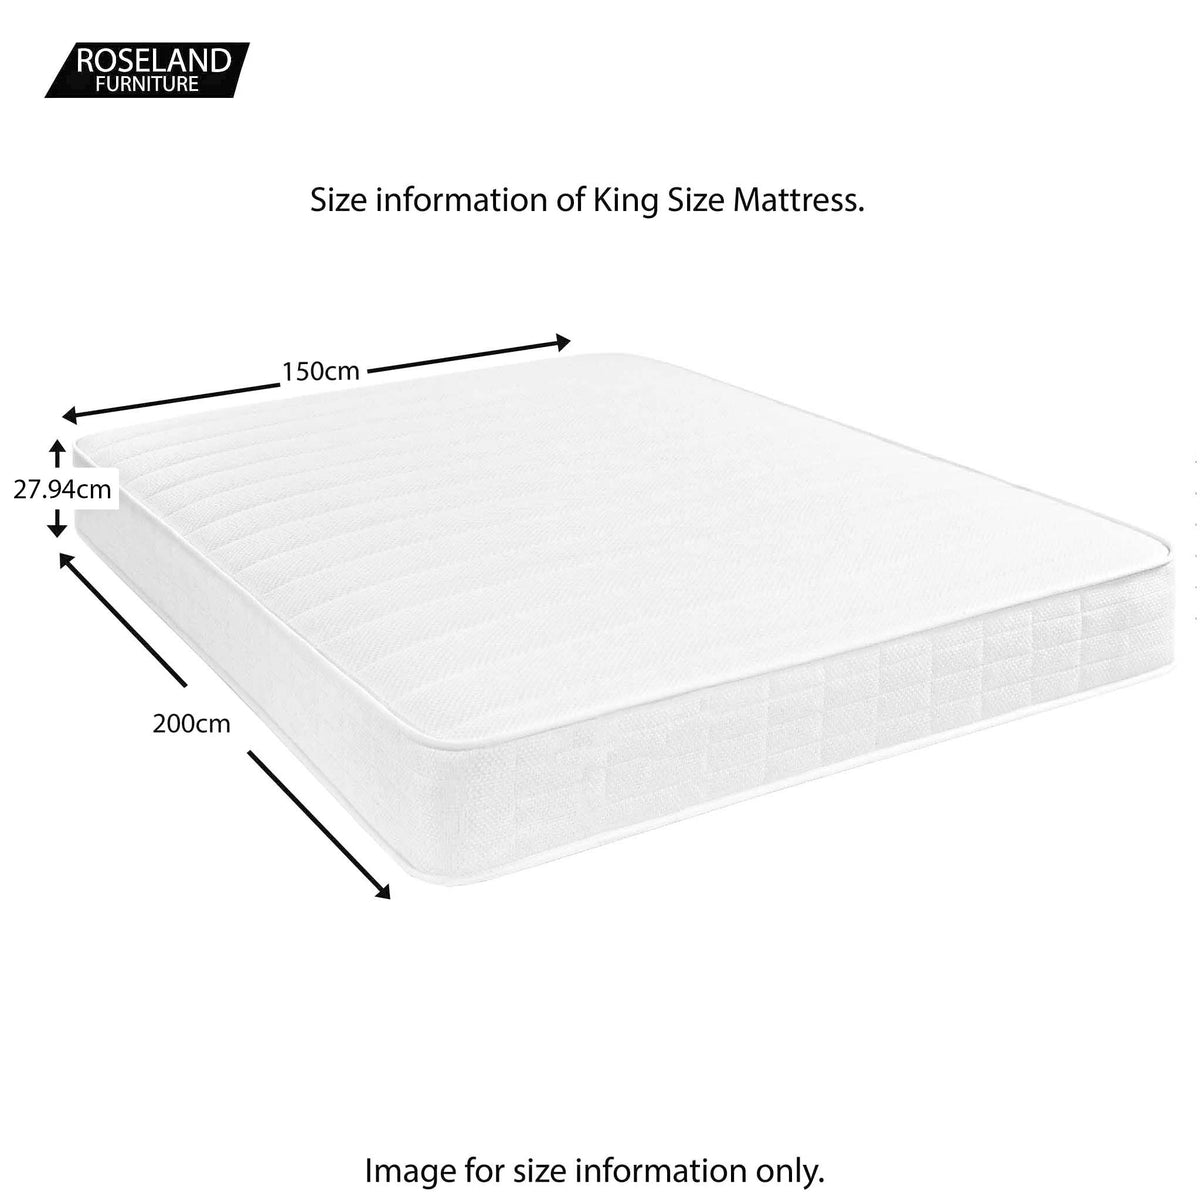 Roseland Sleep Victoria - King Size, Size Guide